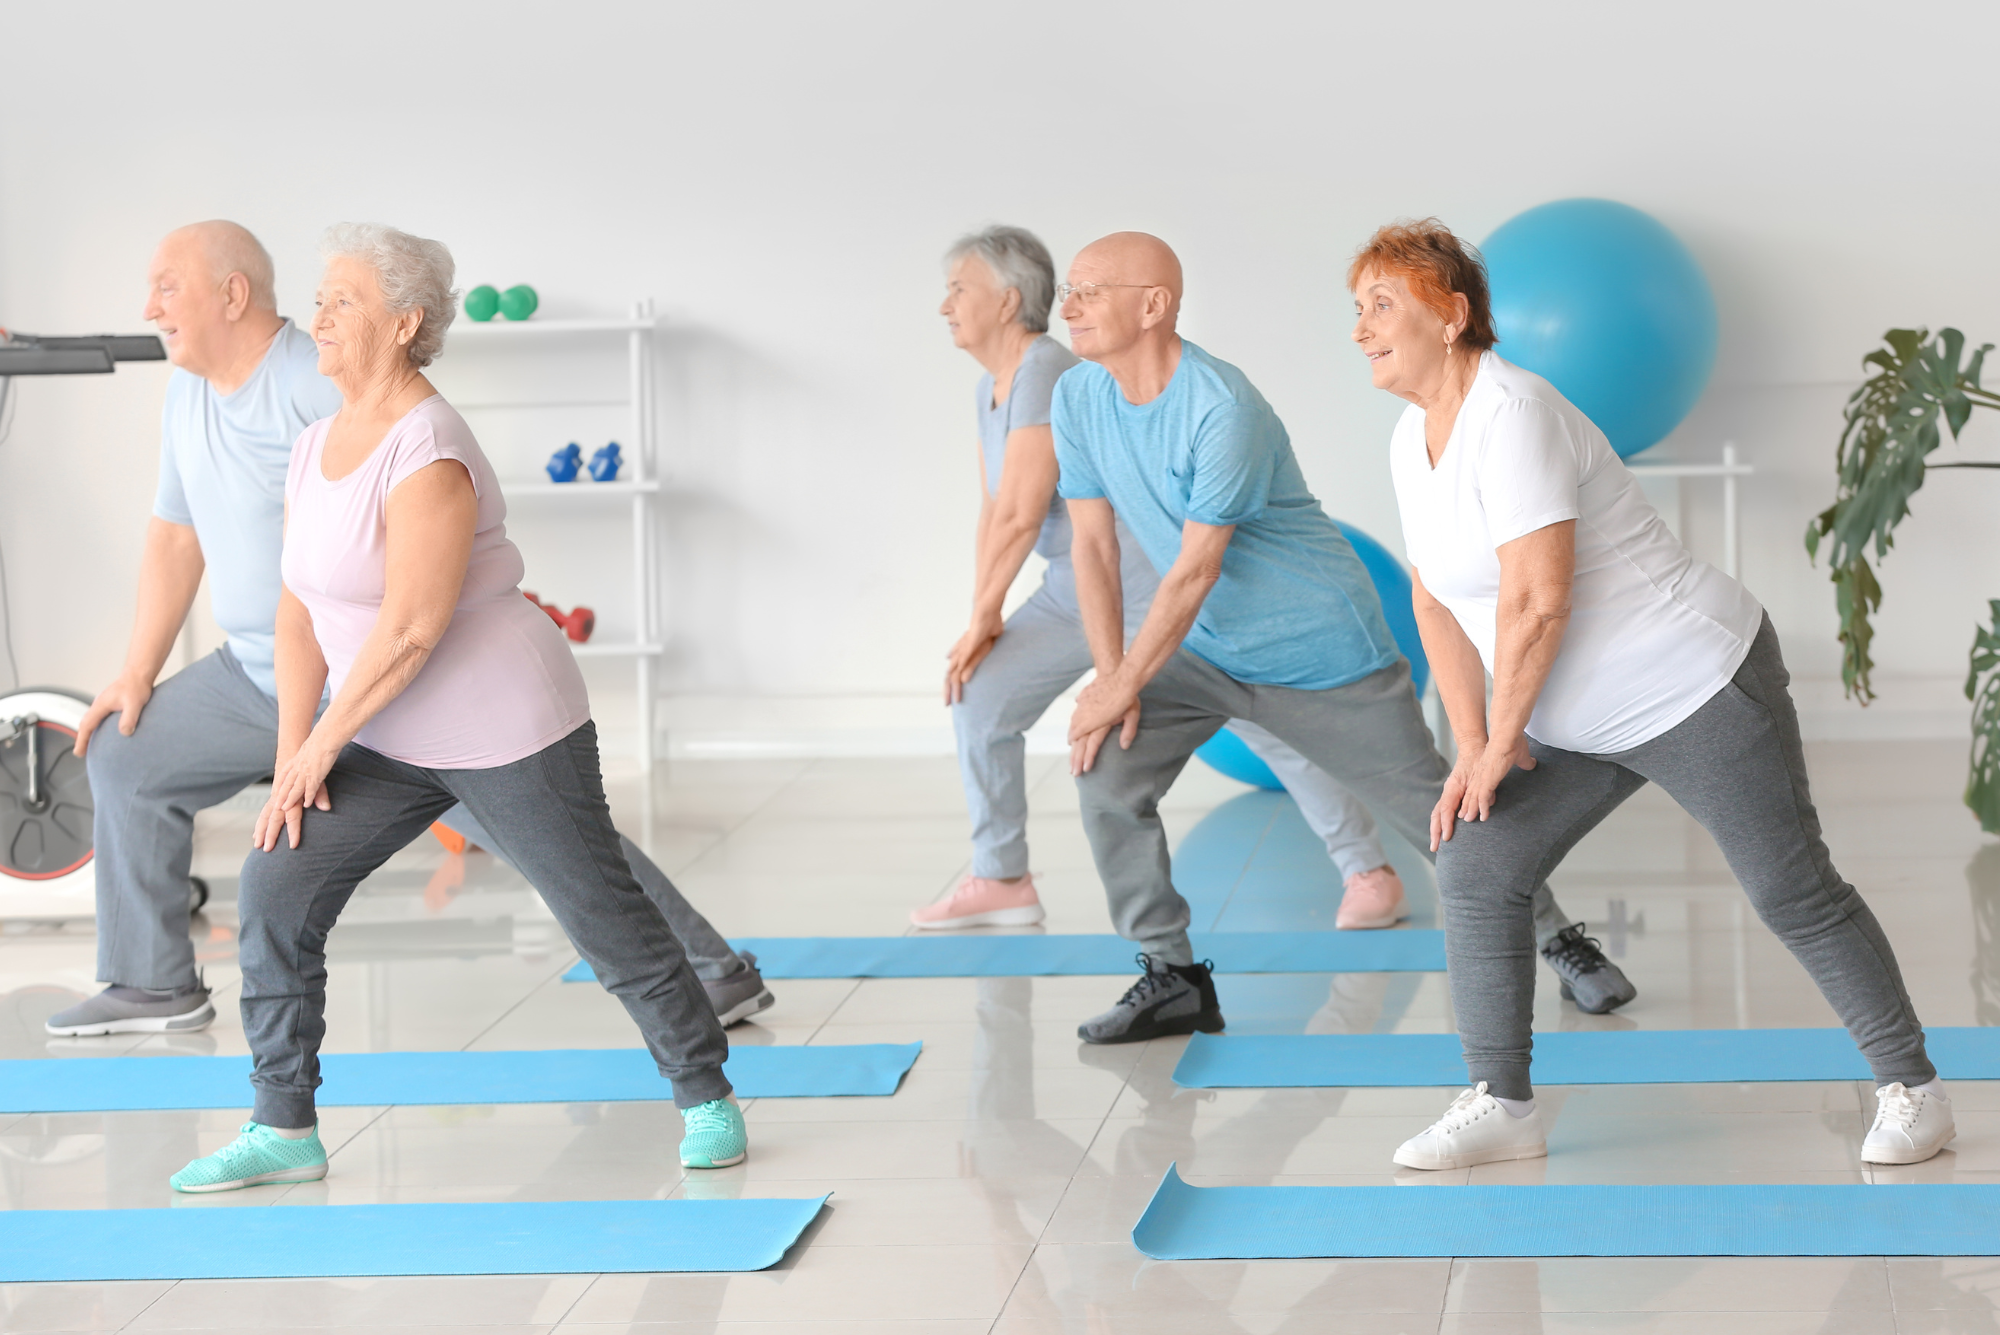 How to Stay Flexible as You Age